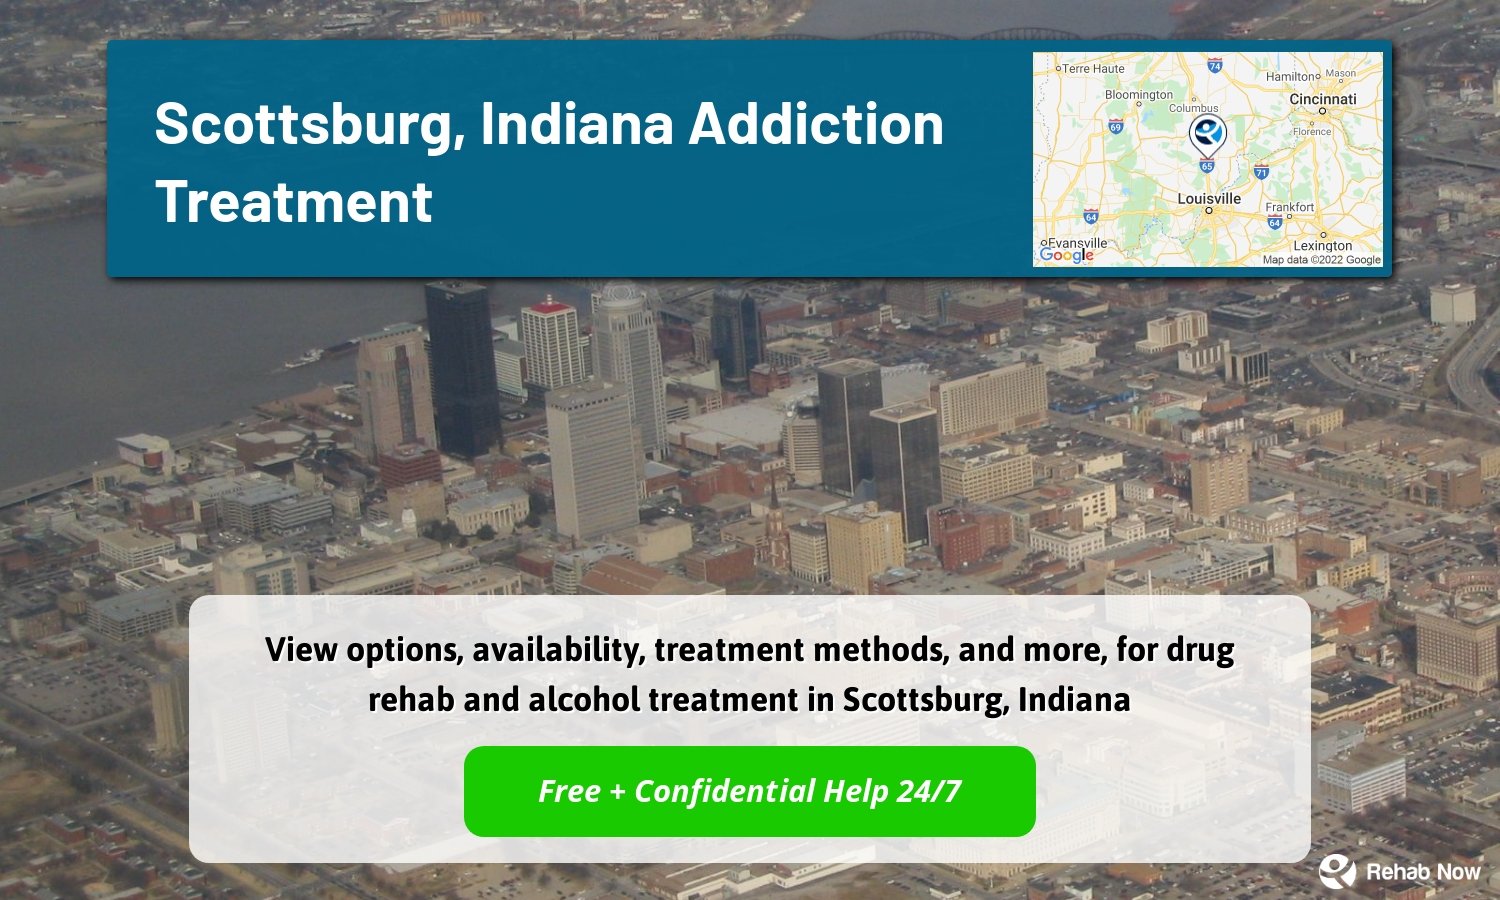 View options, availability, treatment methods, and more, for drug rehab and alcohol treatment in Scottsburg, Indiana